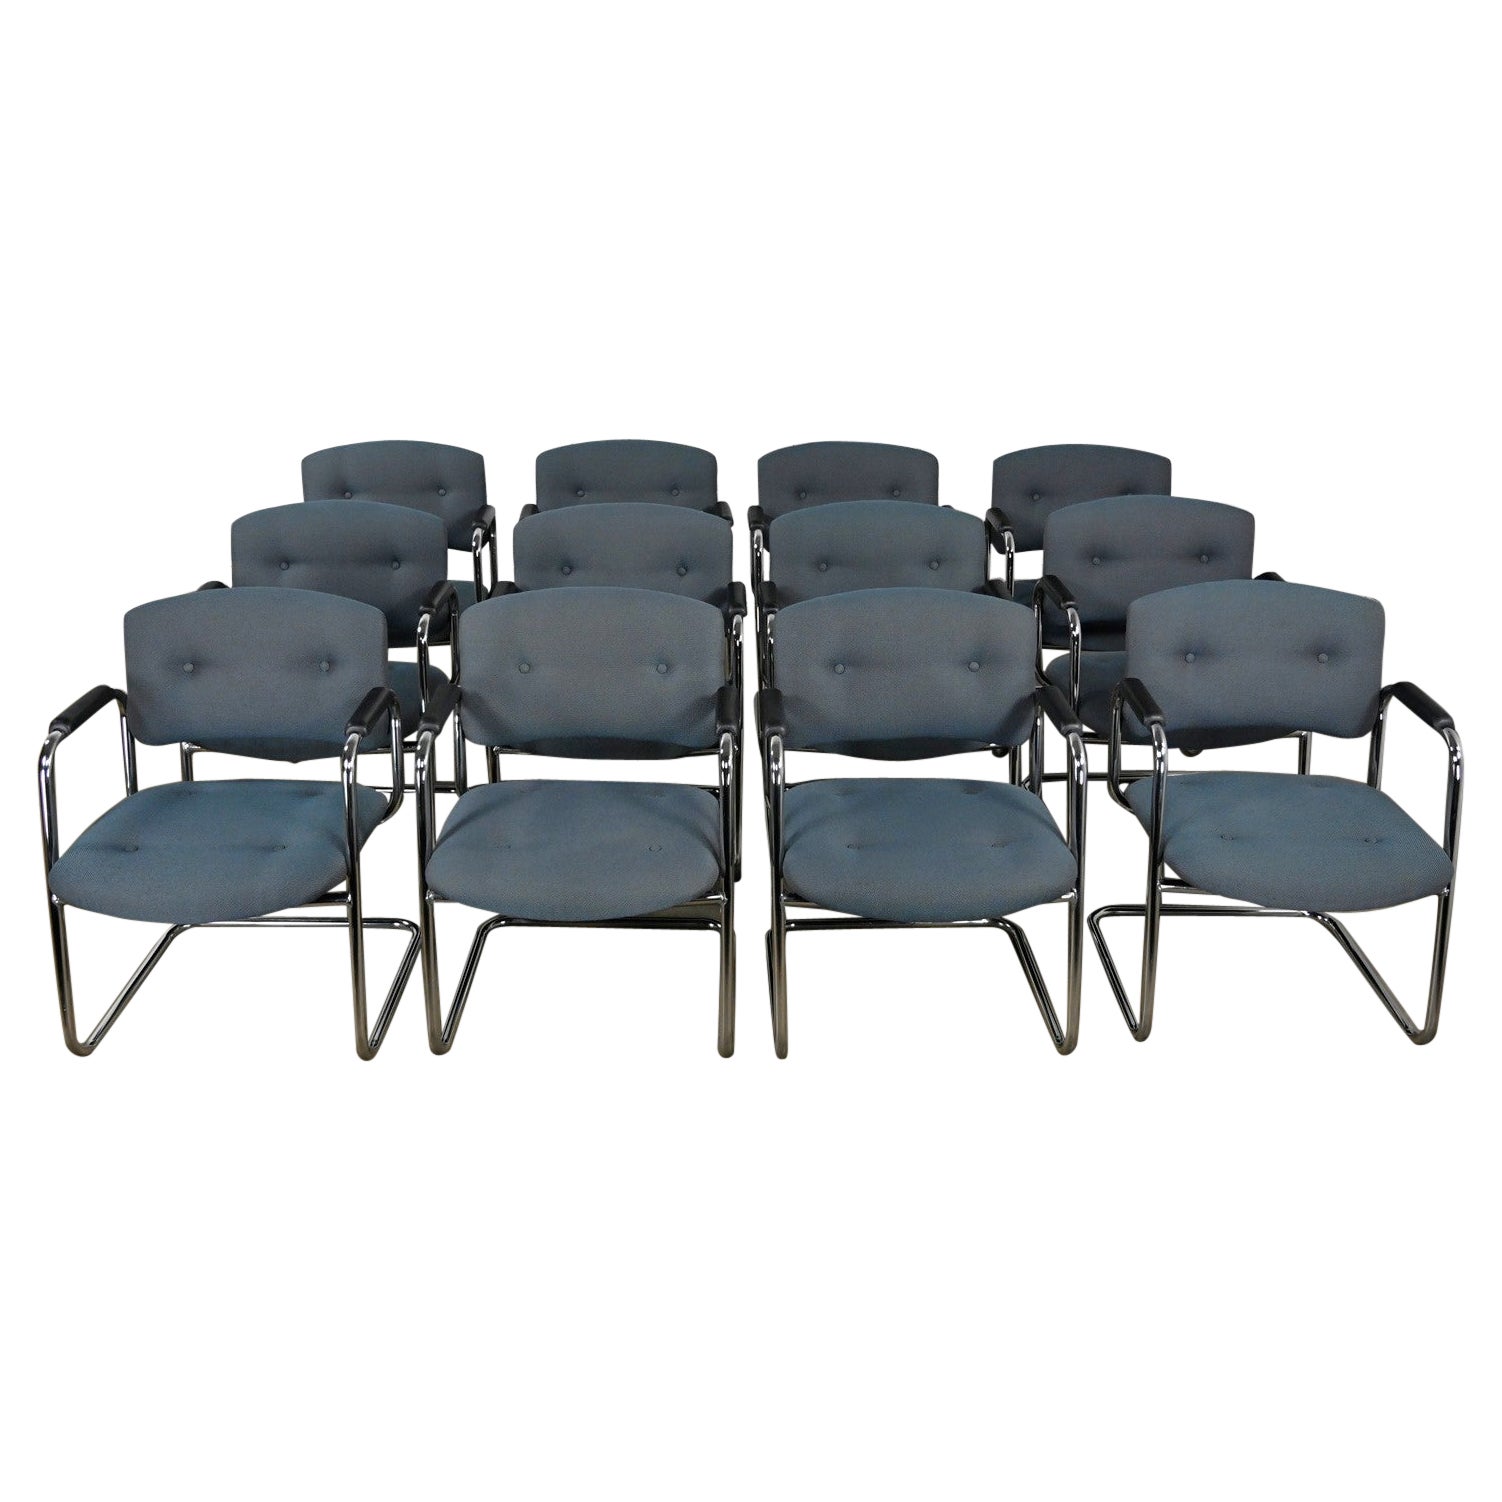 Late 20th Century Gray & Chrome Cantilever Chairs Style Steelcase Set of 12 For Sale